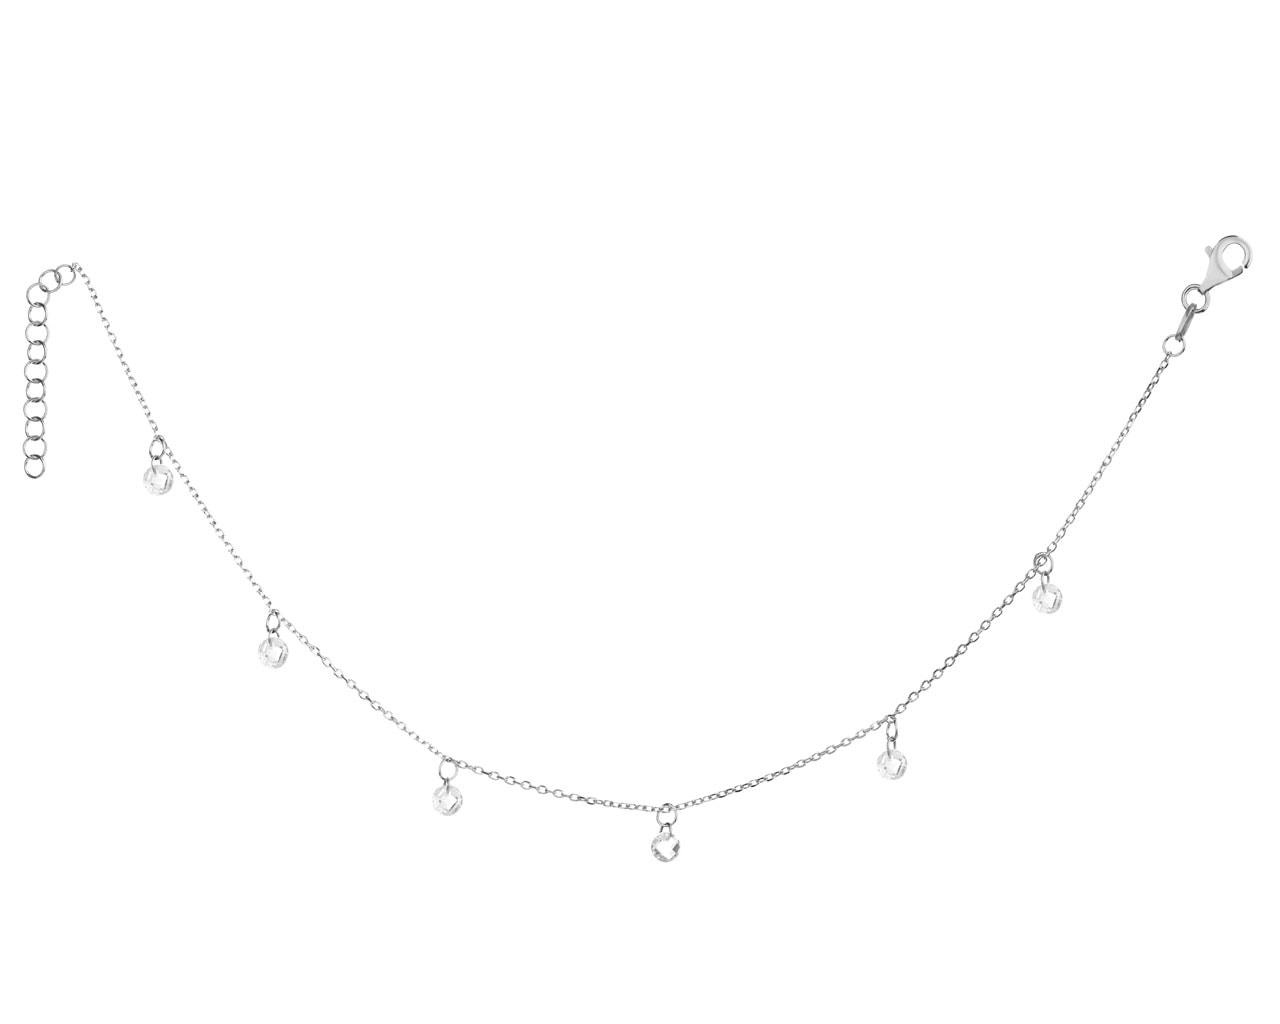 Rhodium Plated Silver Anklet with Glass